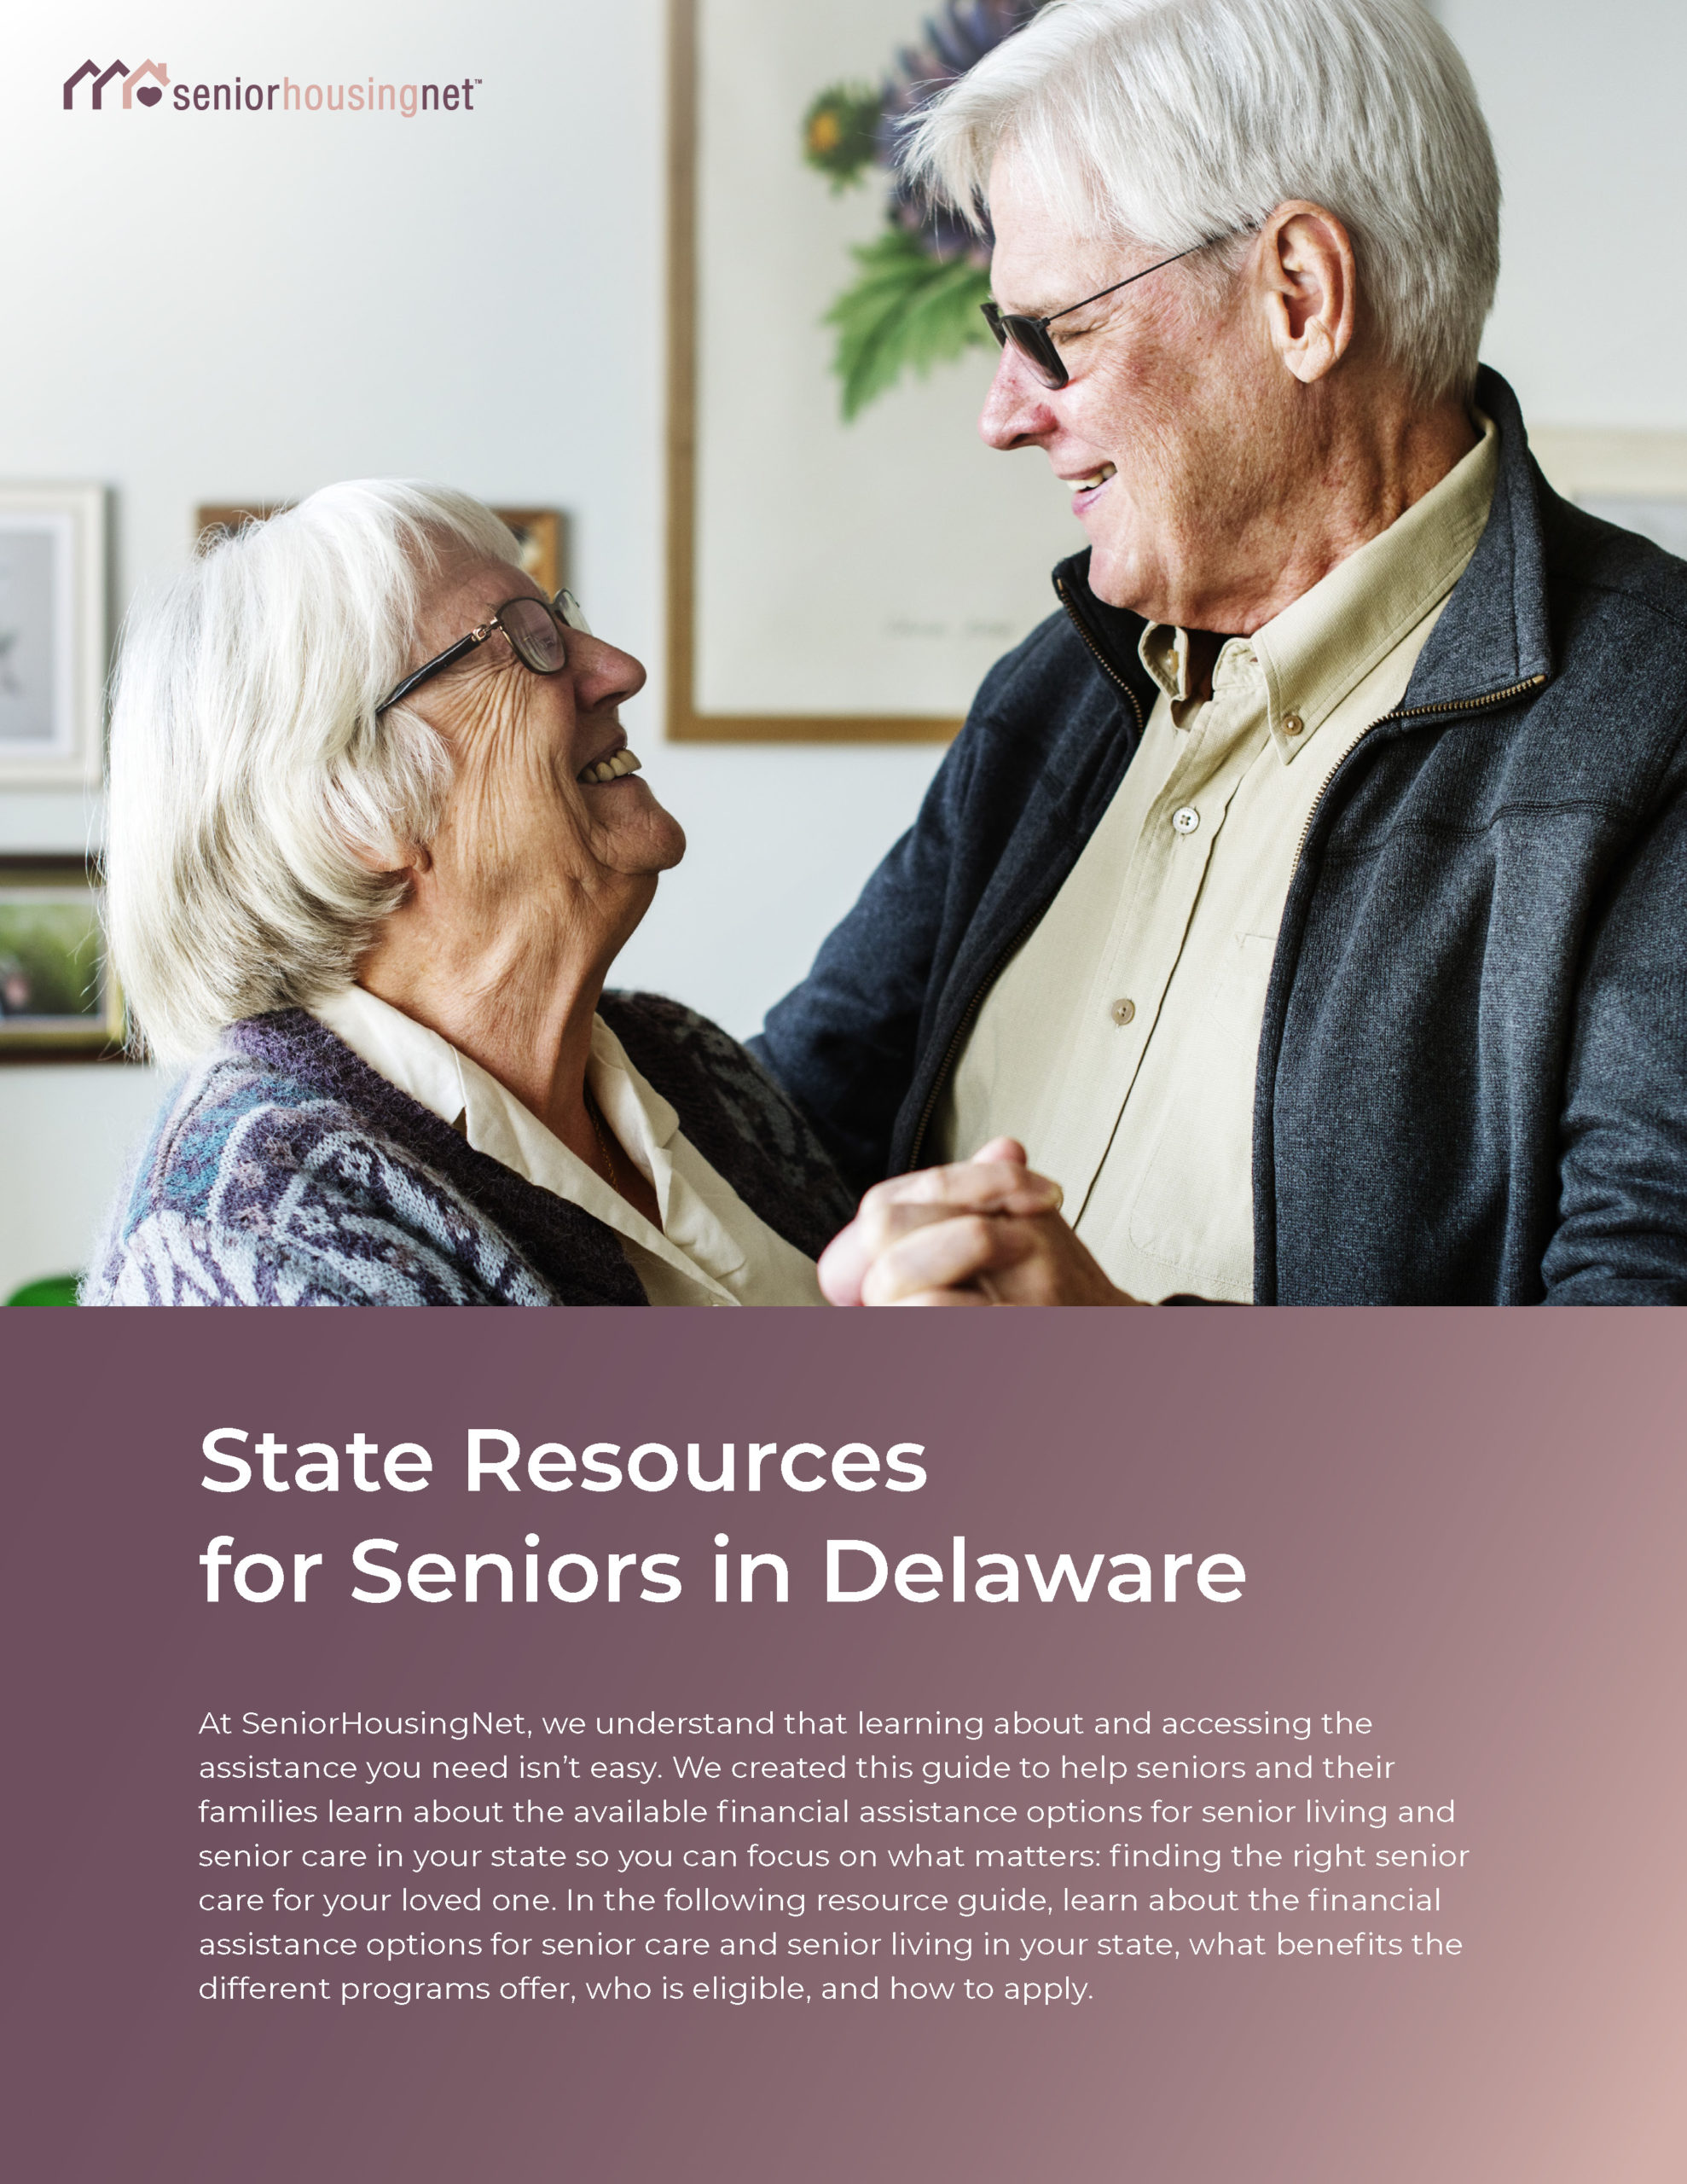 State Resources for Seniors in Delaware